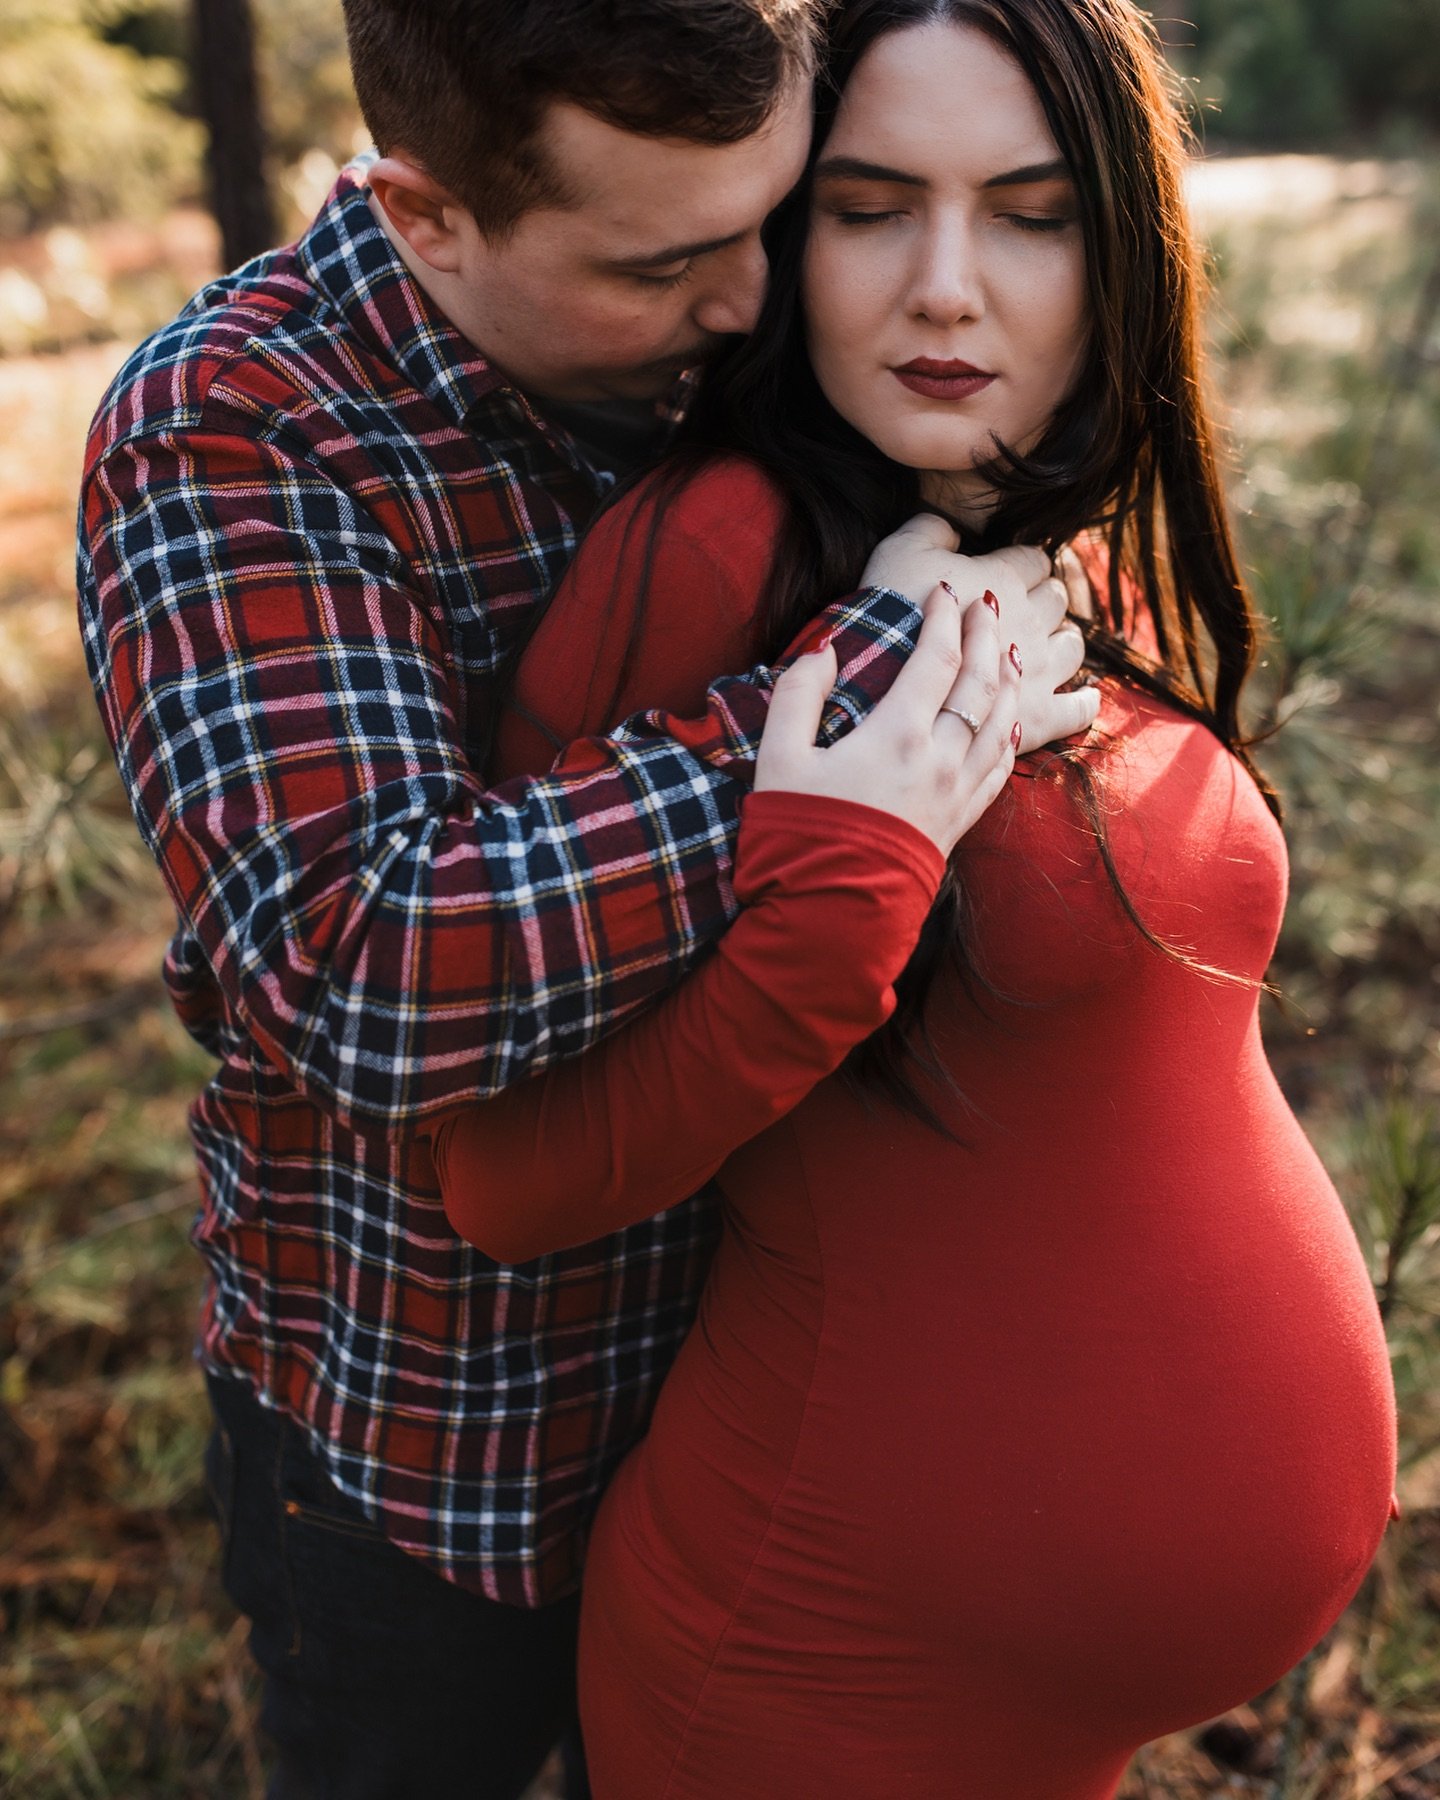 I NEVER do this&hellip;

Flash sale on maternity sessions! Today thru tomorrow only (04/22-04/23).

Here&rsquo;s the deal friends, my portfolio has become slim on maternity sessions for what I am able to share due to various reasons outside of my con